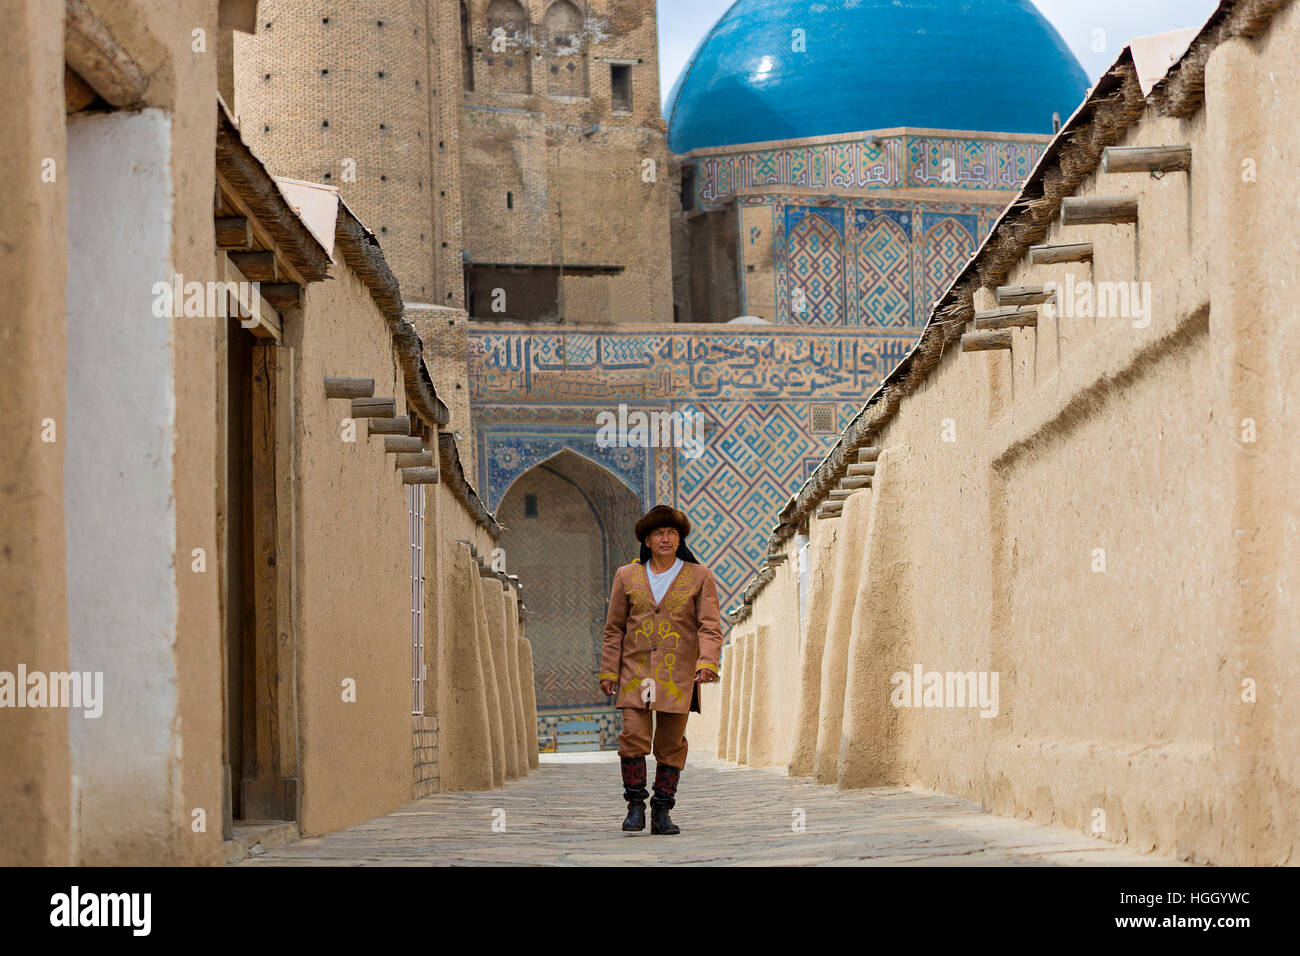 Kazakh man in national costumes with the blue domes of the Khoja Ahmed Yasawi Mausoleum in the background, Turkestan, Kazakhstan Stock Photo